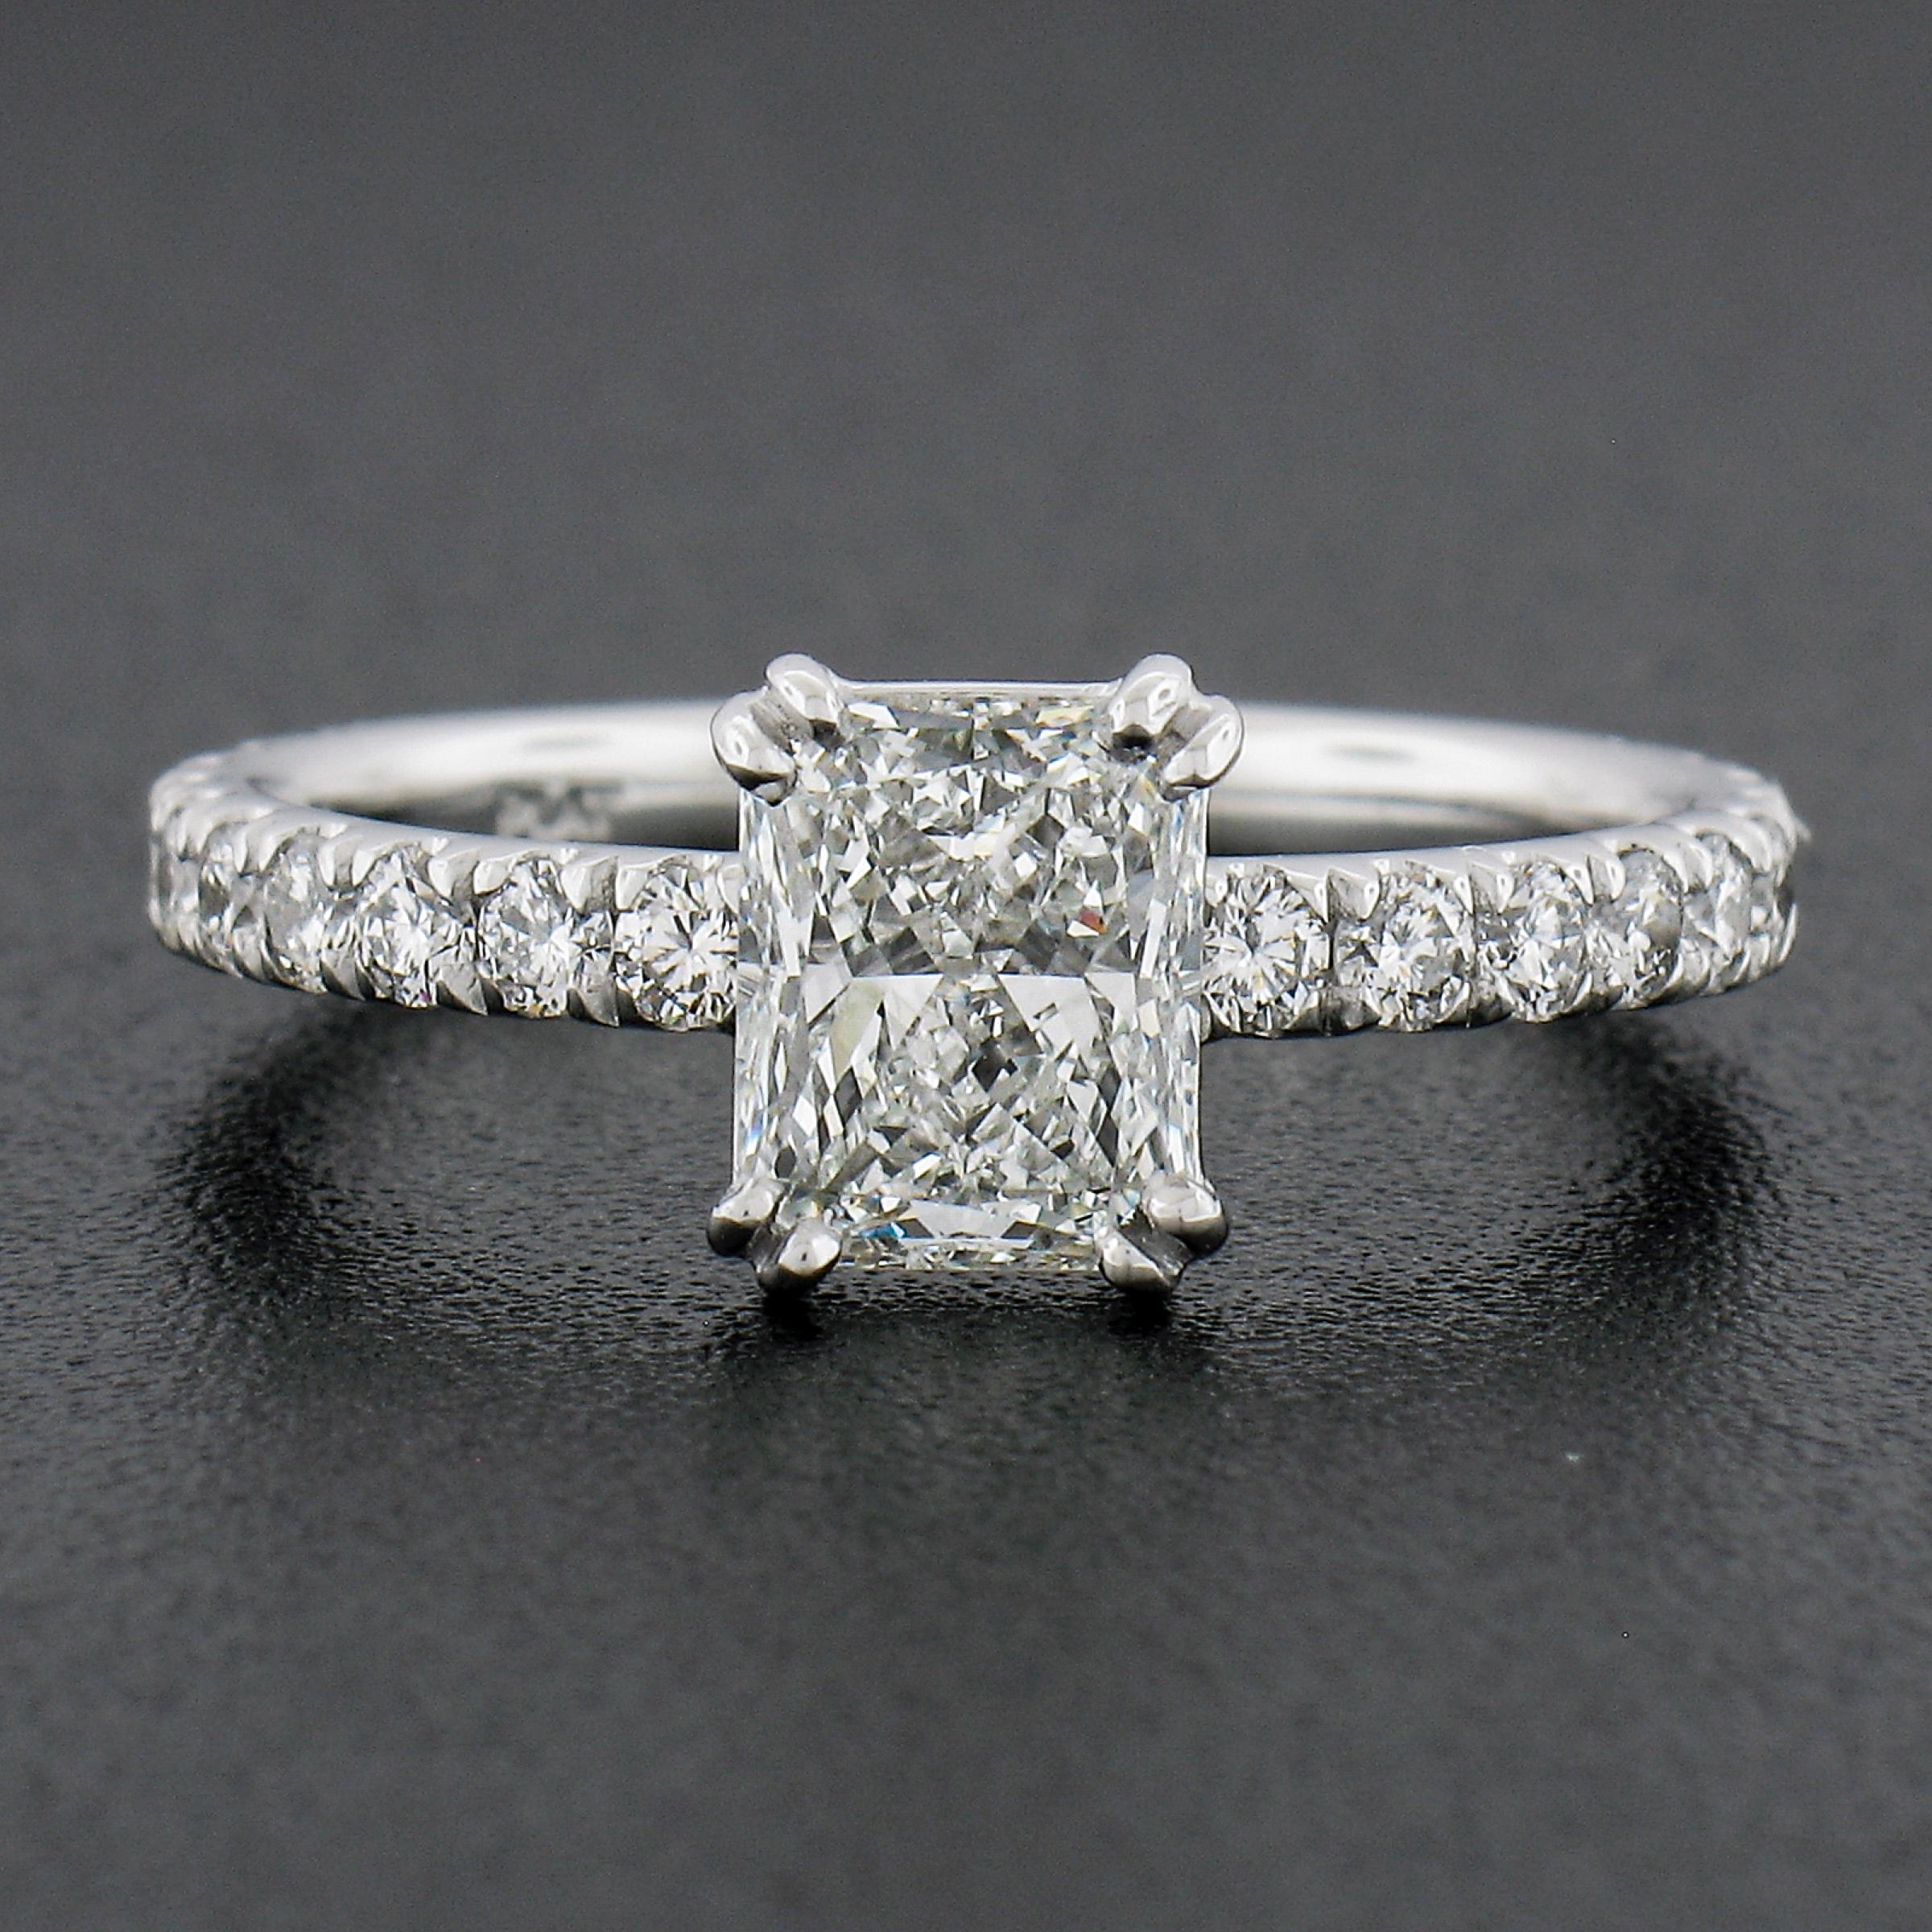 NEW Platinum GIA 1.54ctw Elongated Radiant Cut Diamond Solitaire Engagement Ring For Sale 1